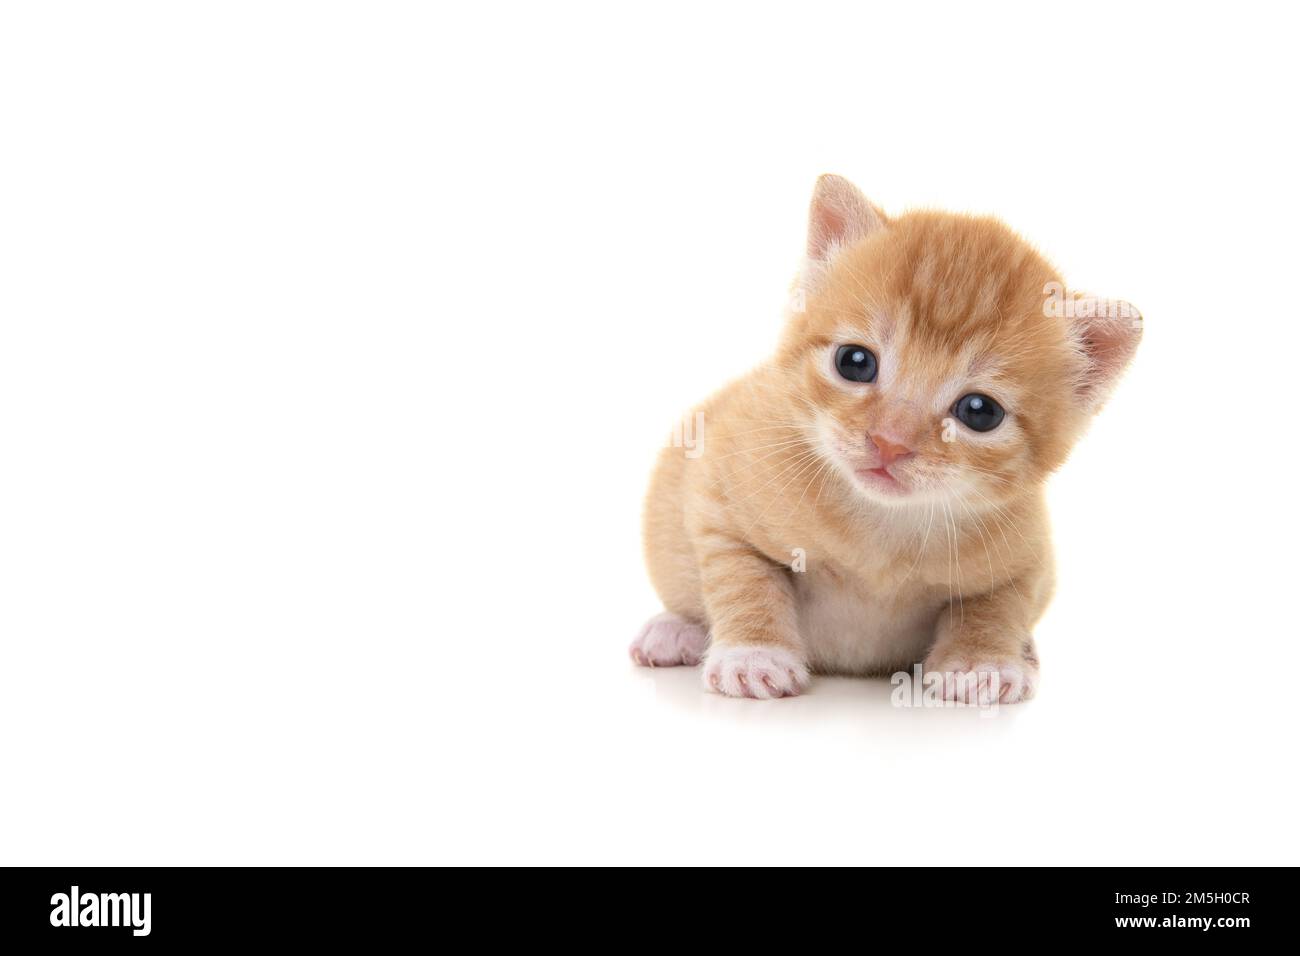 Adorable three weeks old ginger kitten looking at the camera isolated on a white background Stock Photo